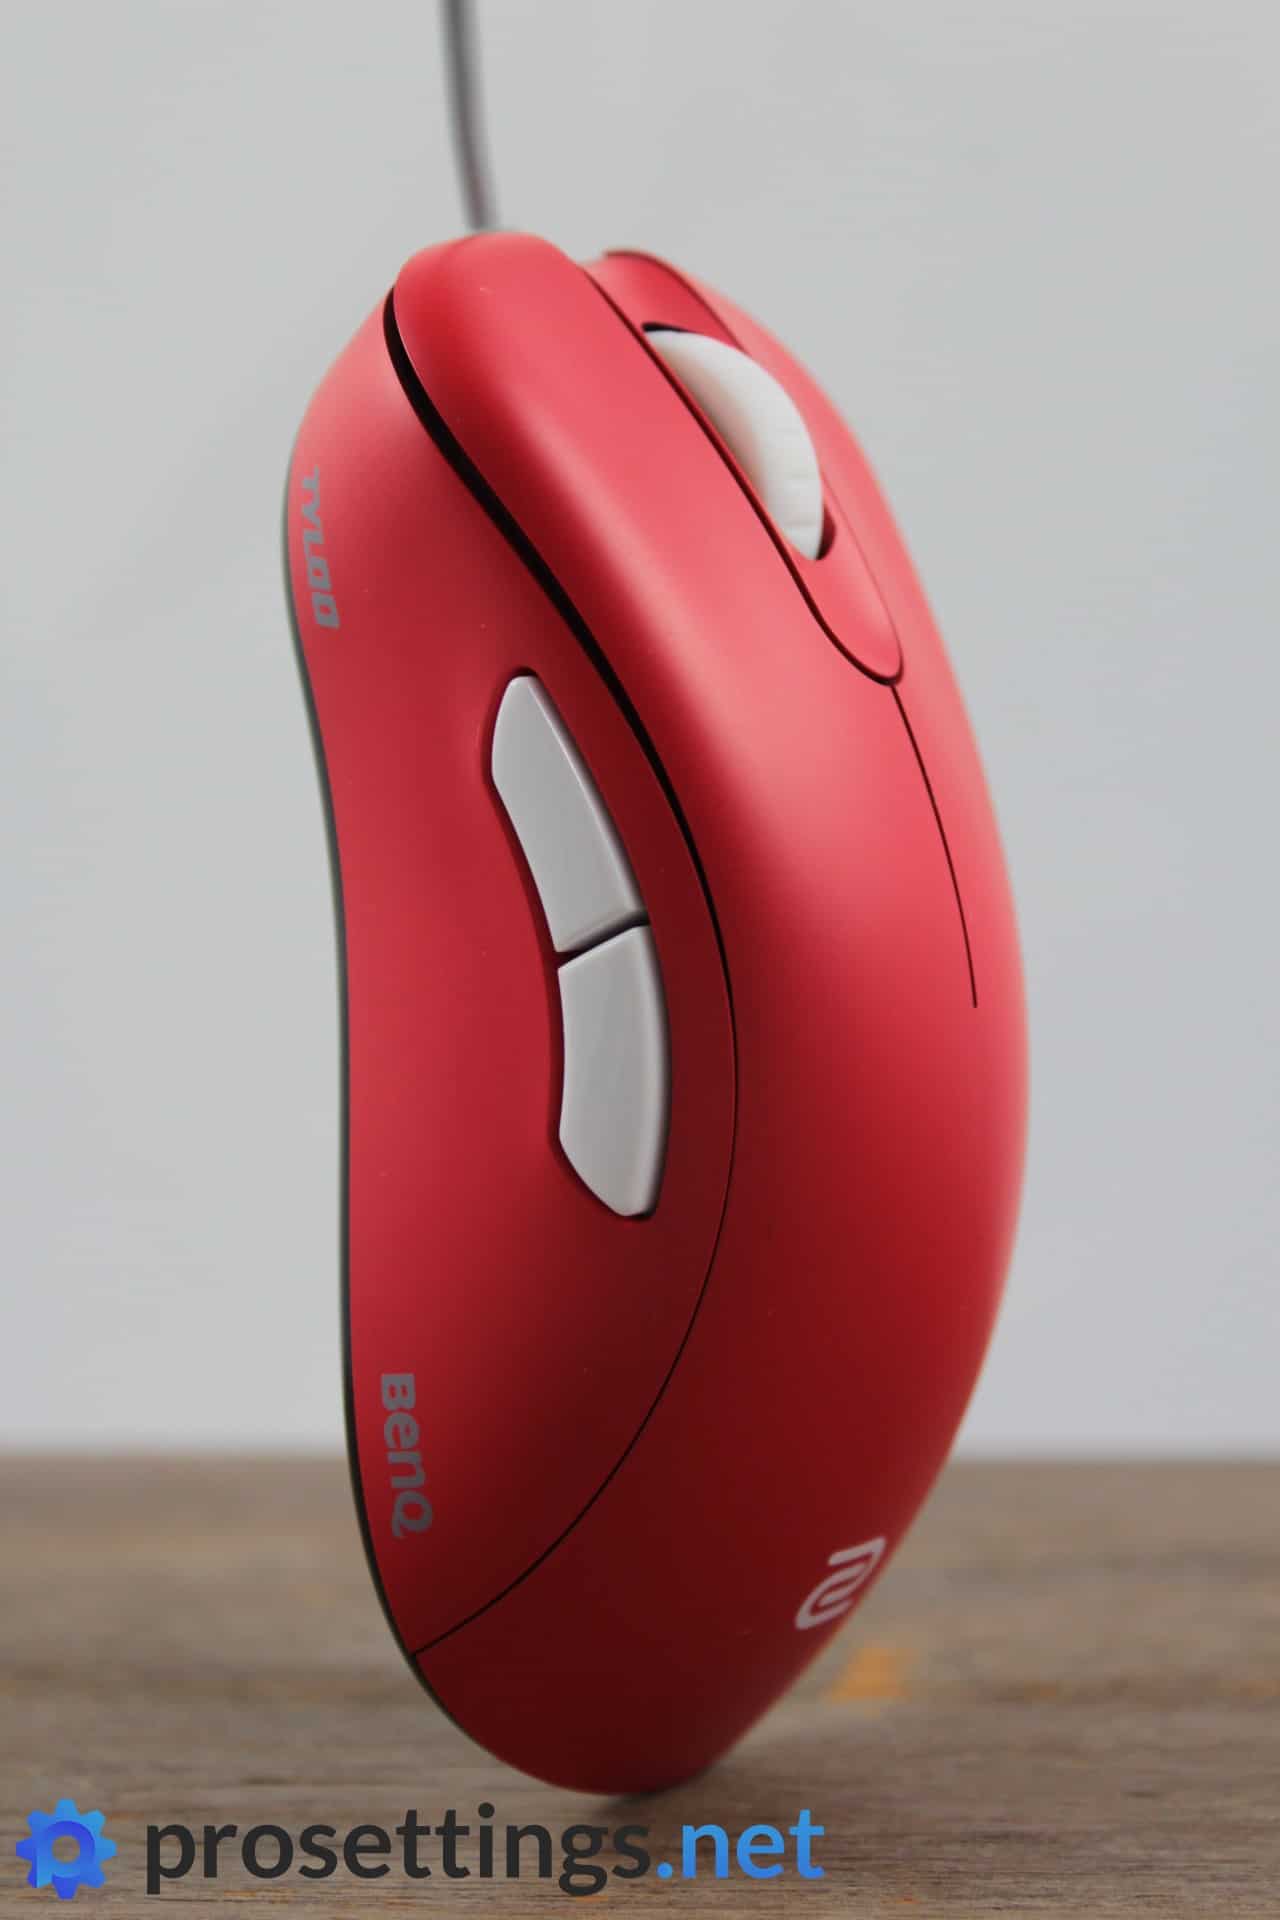 Zowie EC2 Tyloo Review Mouse